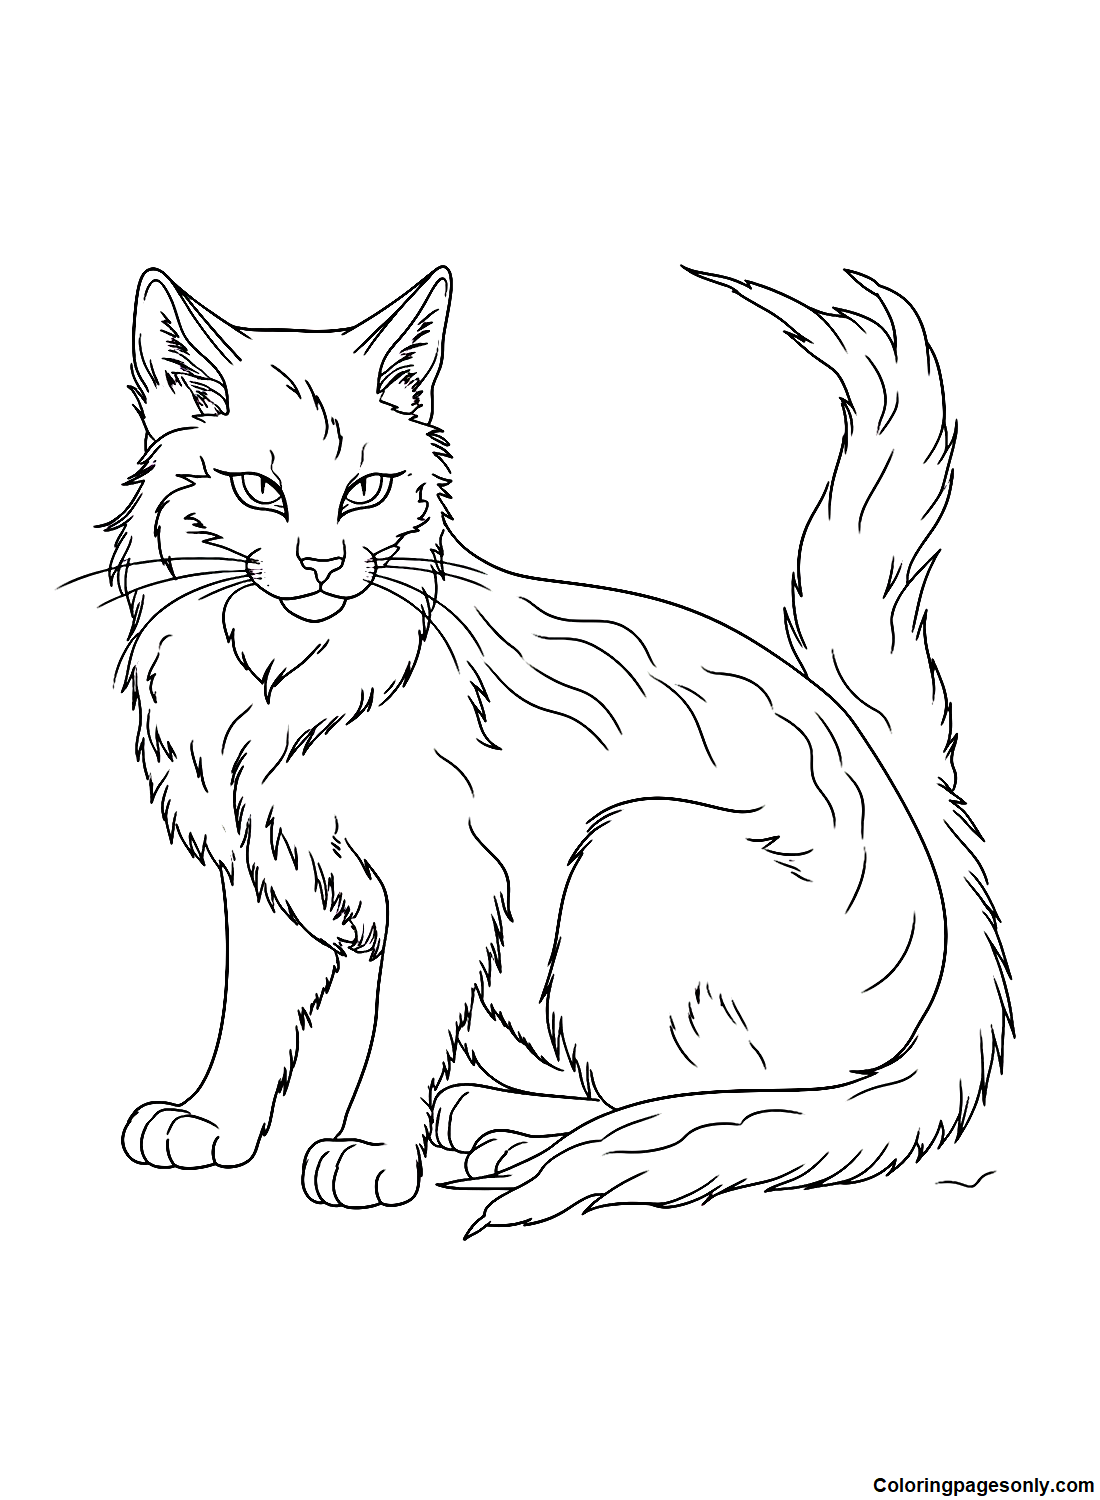 Warrior Cats Firestar Coloring Pages